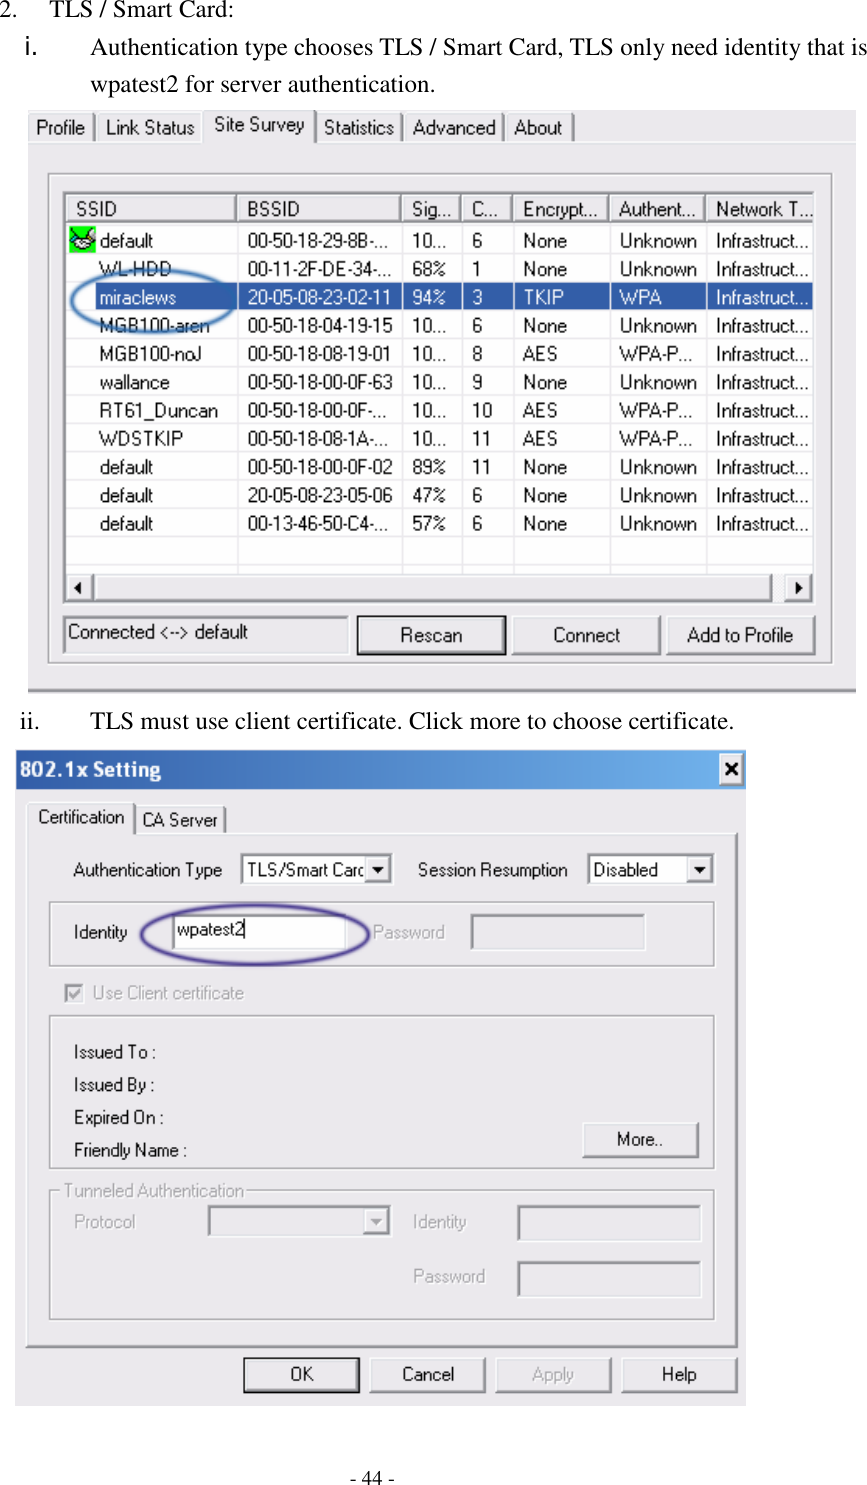    - 44 - 2. TLS / Smart Card: i. Authentication type chooses TLS / Smart Card, TLS only need identity that is wpatest2 for server authentication.  ii. TLS must use client certificate. Click more to choose certificate.  